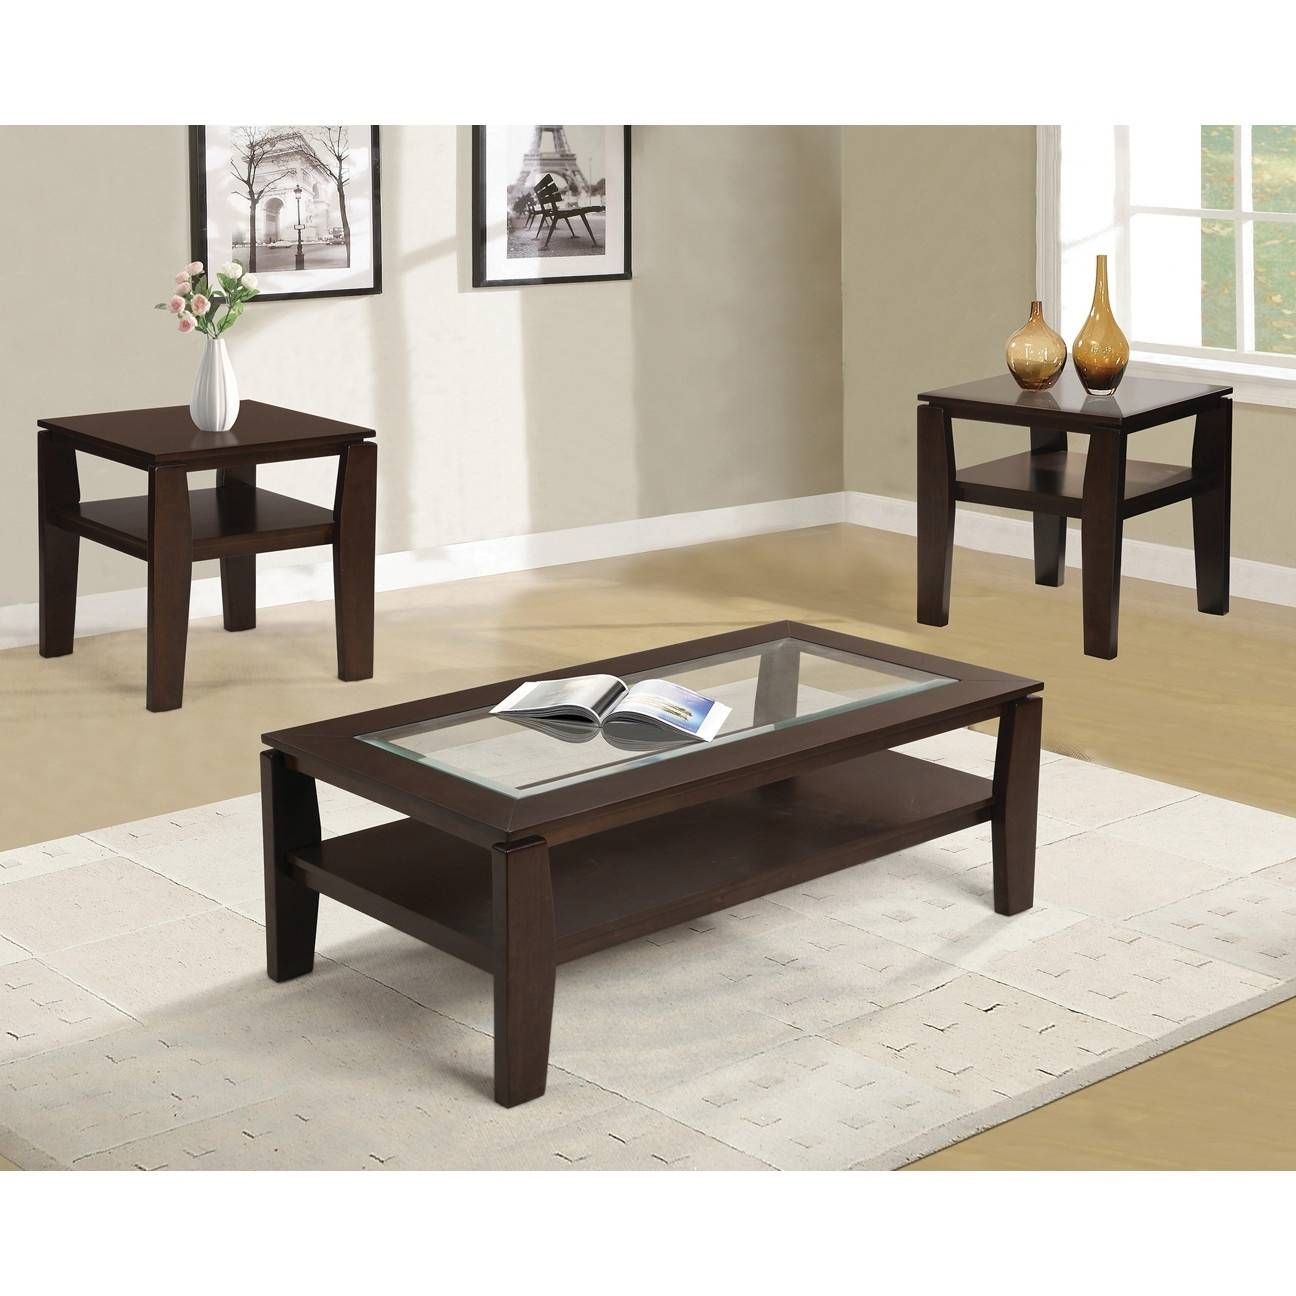 Coffee Table : Wayfair Glass Coffee Table Pertaining To Inspiring With Regard To Wayfair Glass Coffee Tables (View 4 of 30)